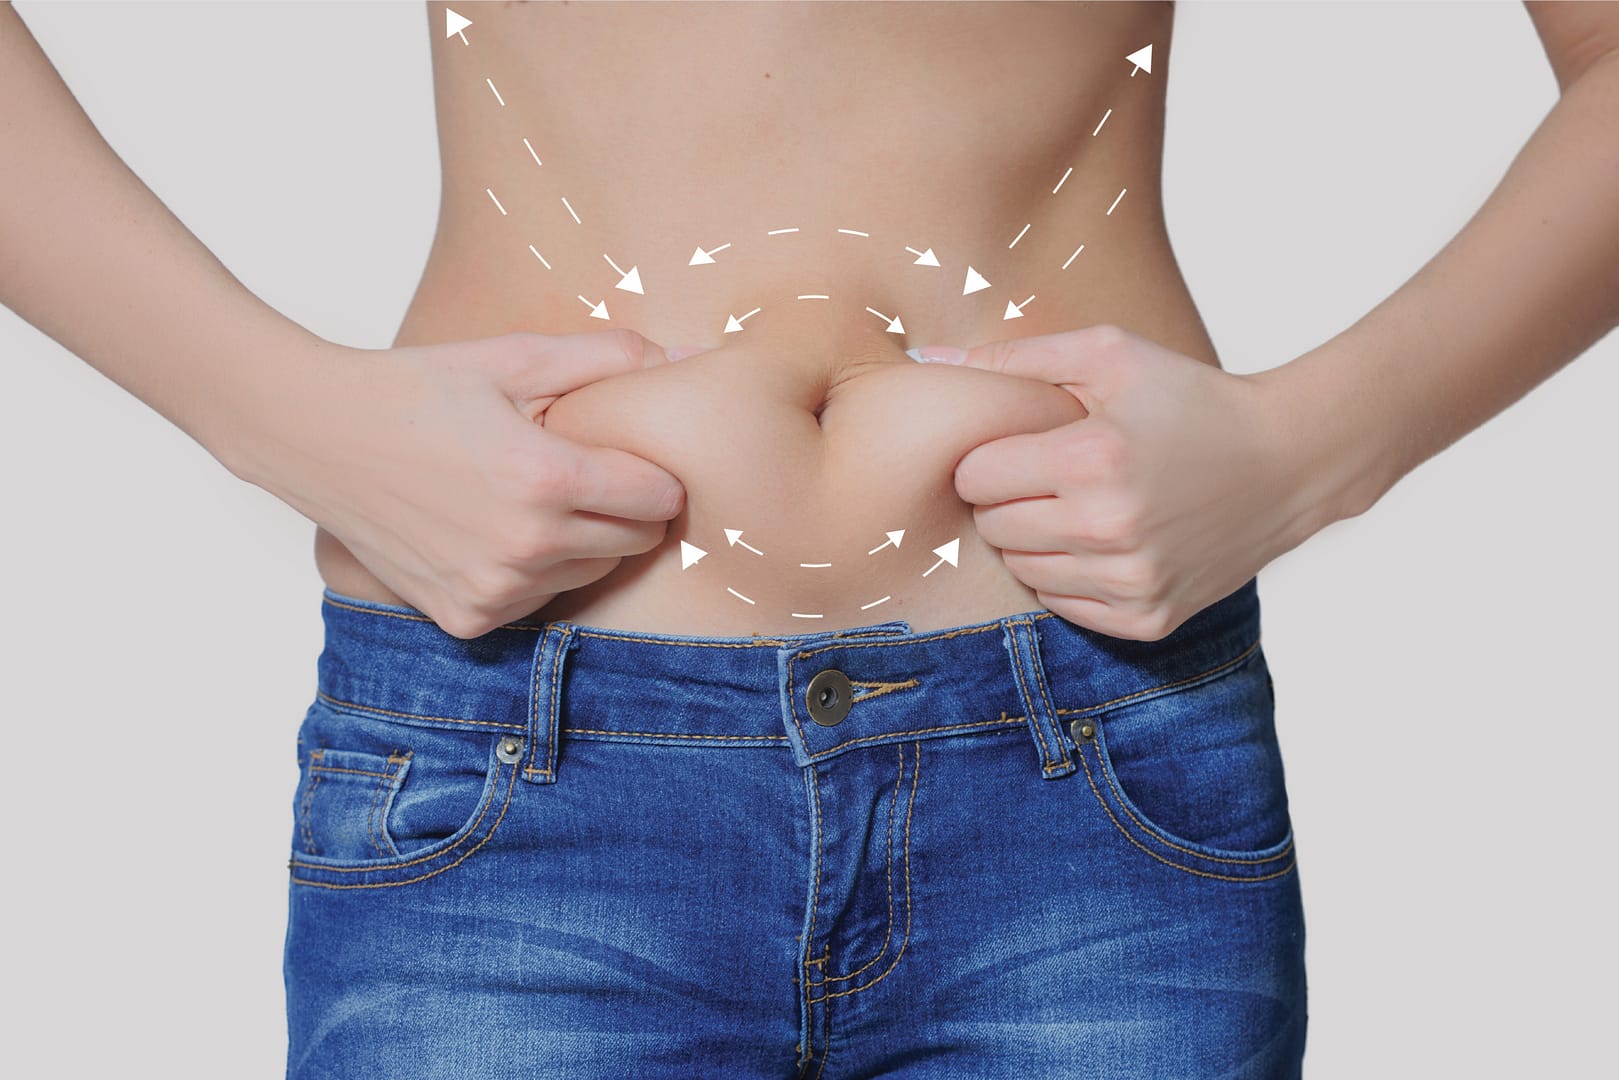 How to Reduce Breast Size: Natural Methods vs. Surgery